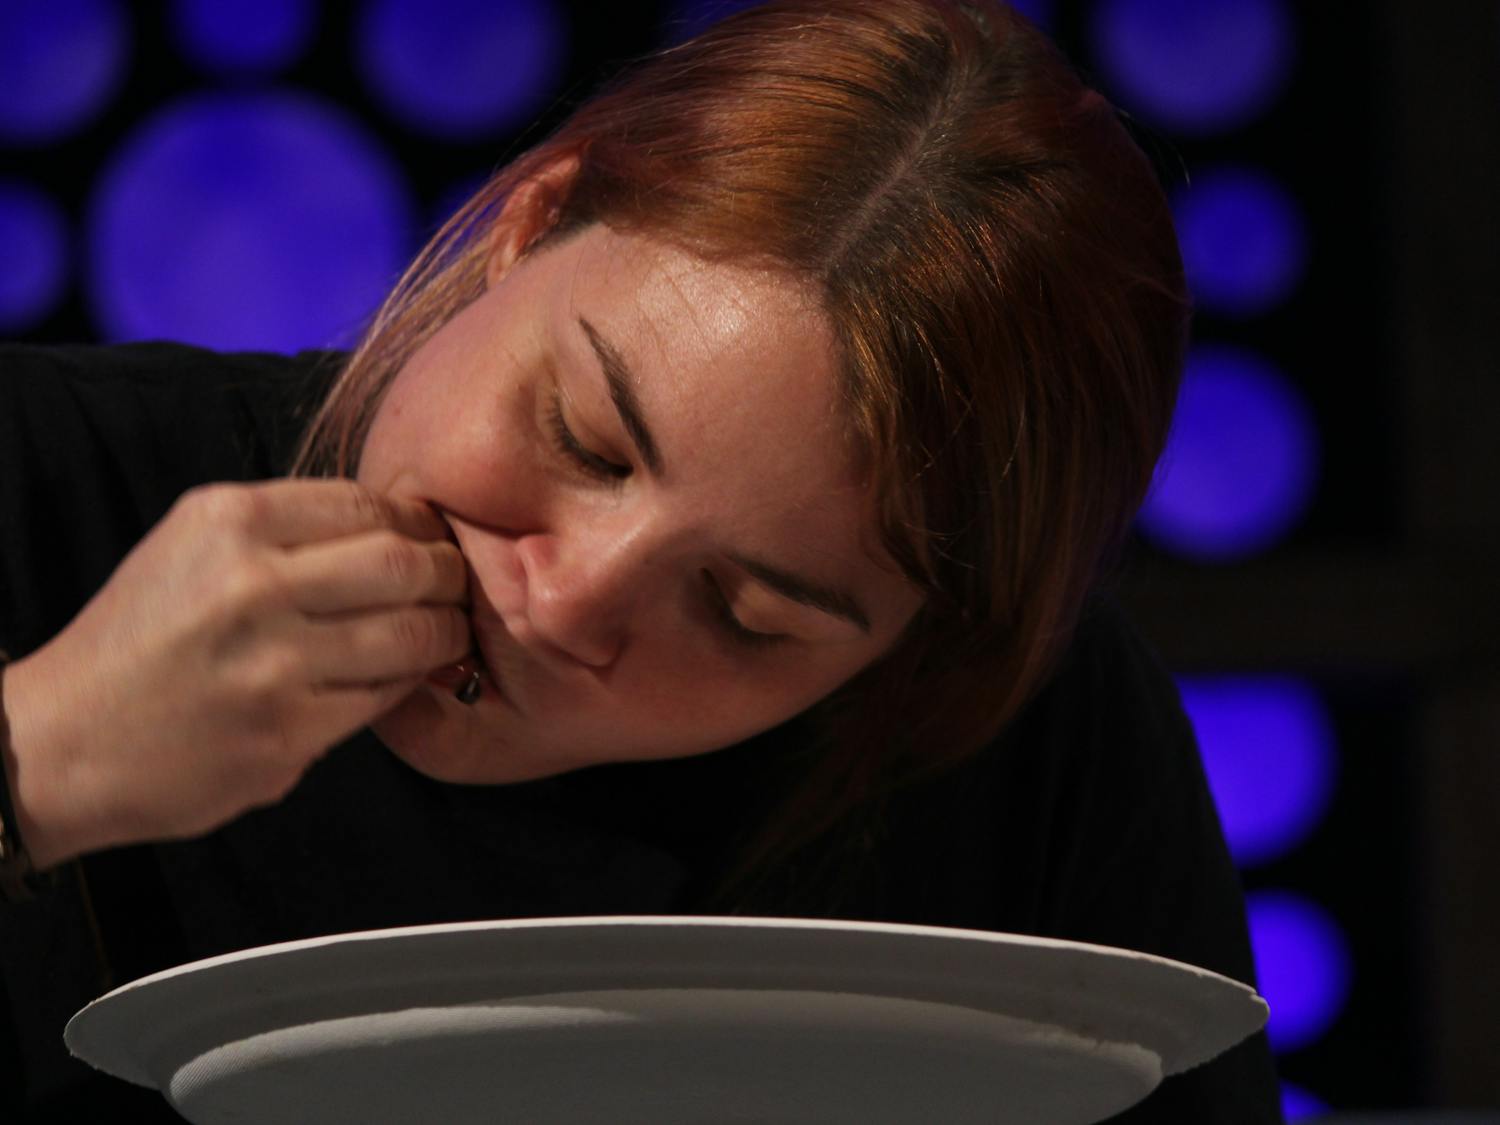 Andrea Reddick, 32, eats a mullet’s eye during an eating contest at the 10 CAN Banquet &amp; Wild Florida Feast on Saturday.